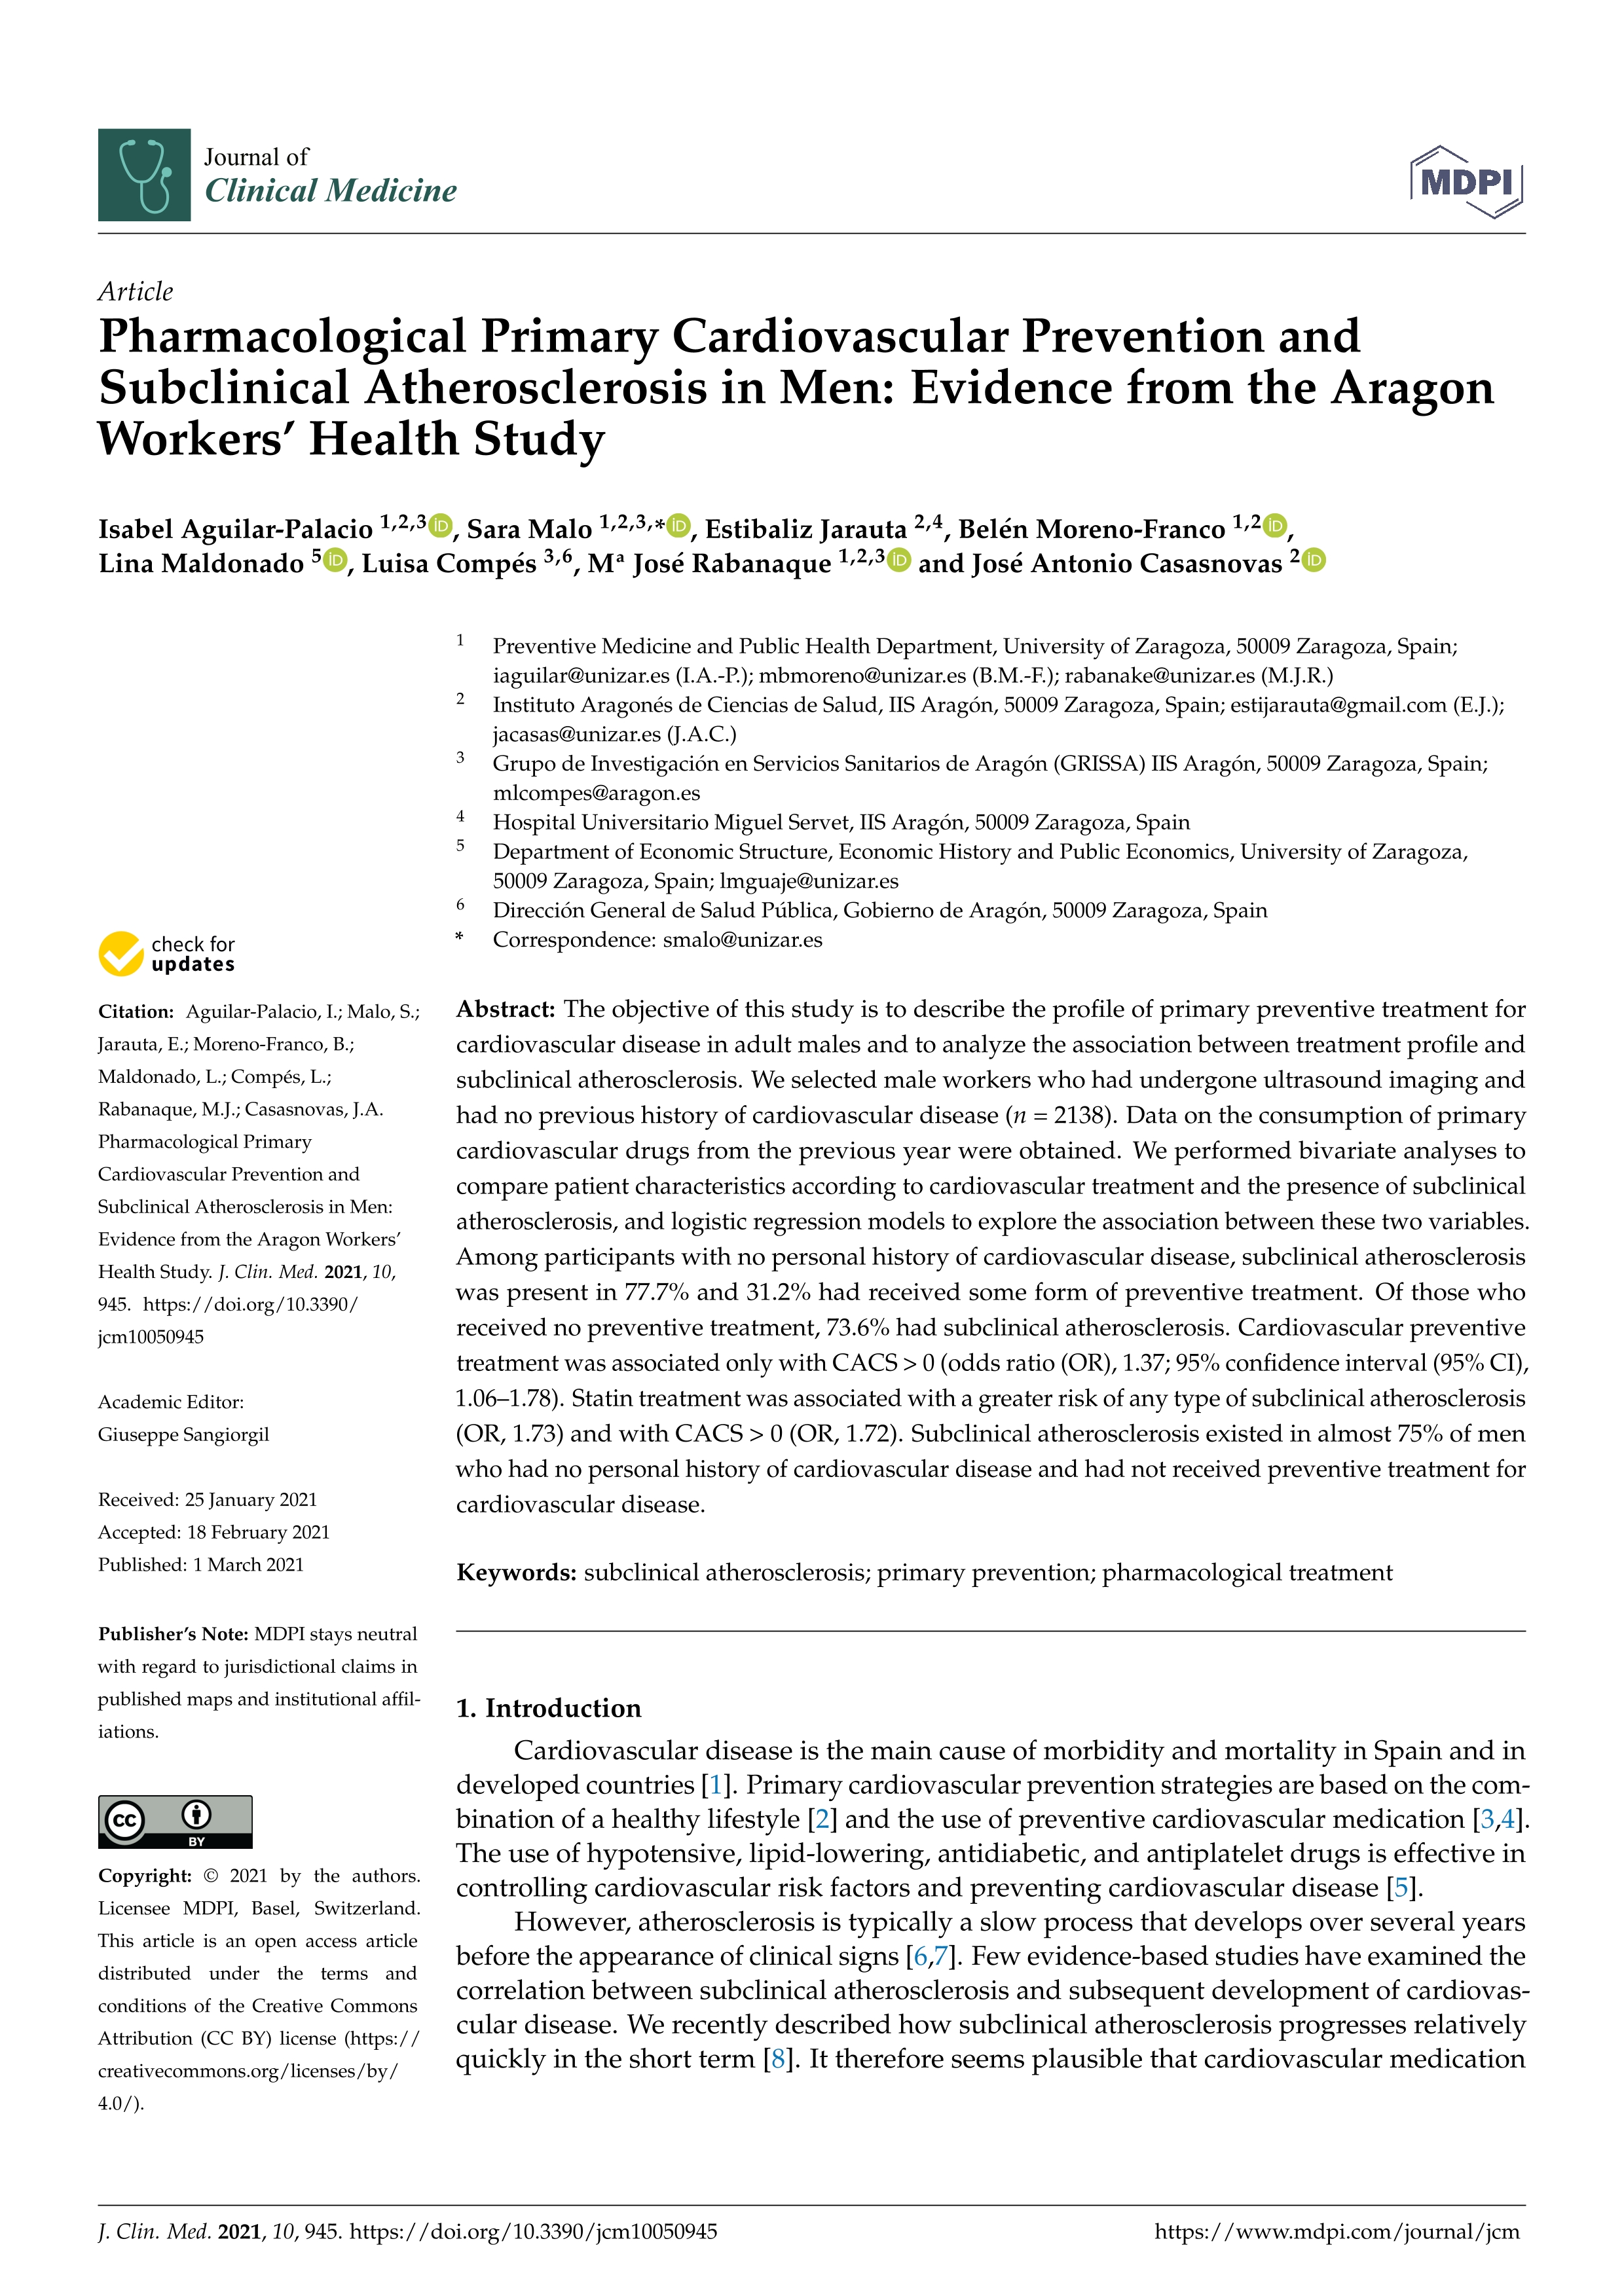 Pharmacological primary cardiovascular prevention and subclinical atherosclerosis in men: Evidence from the aragon workers'' health study